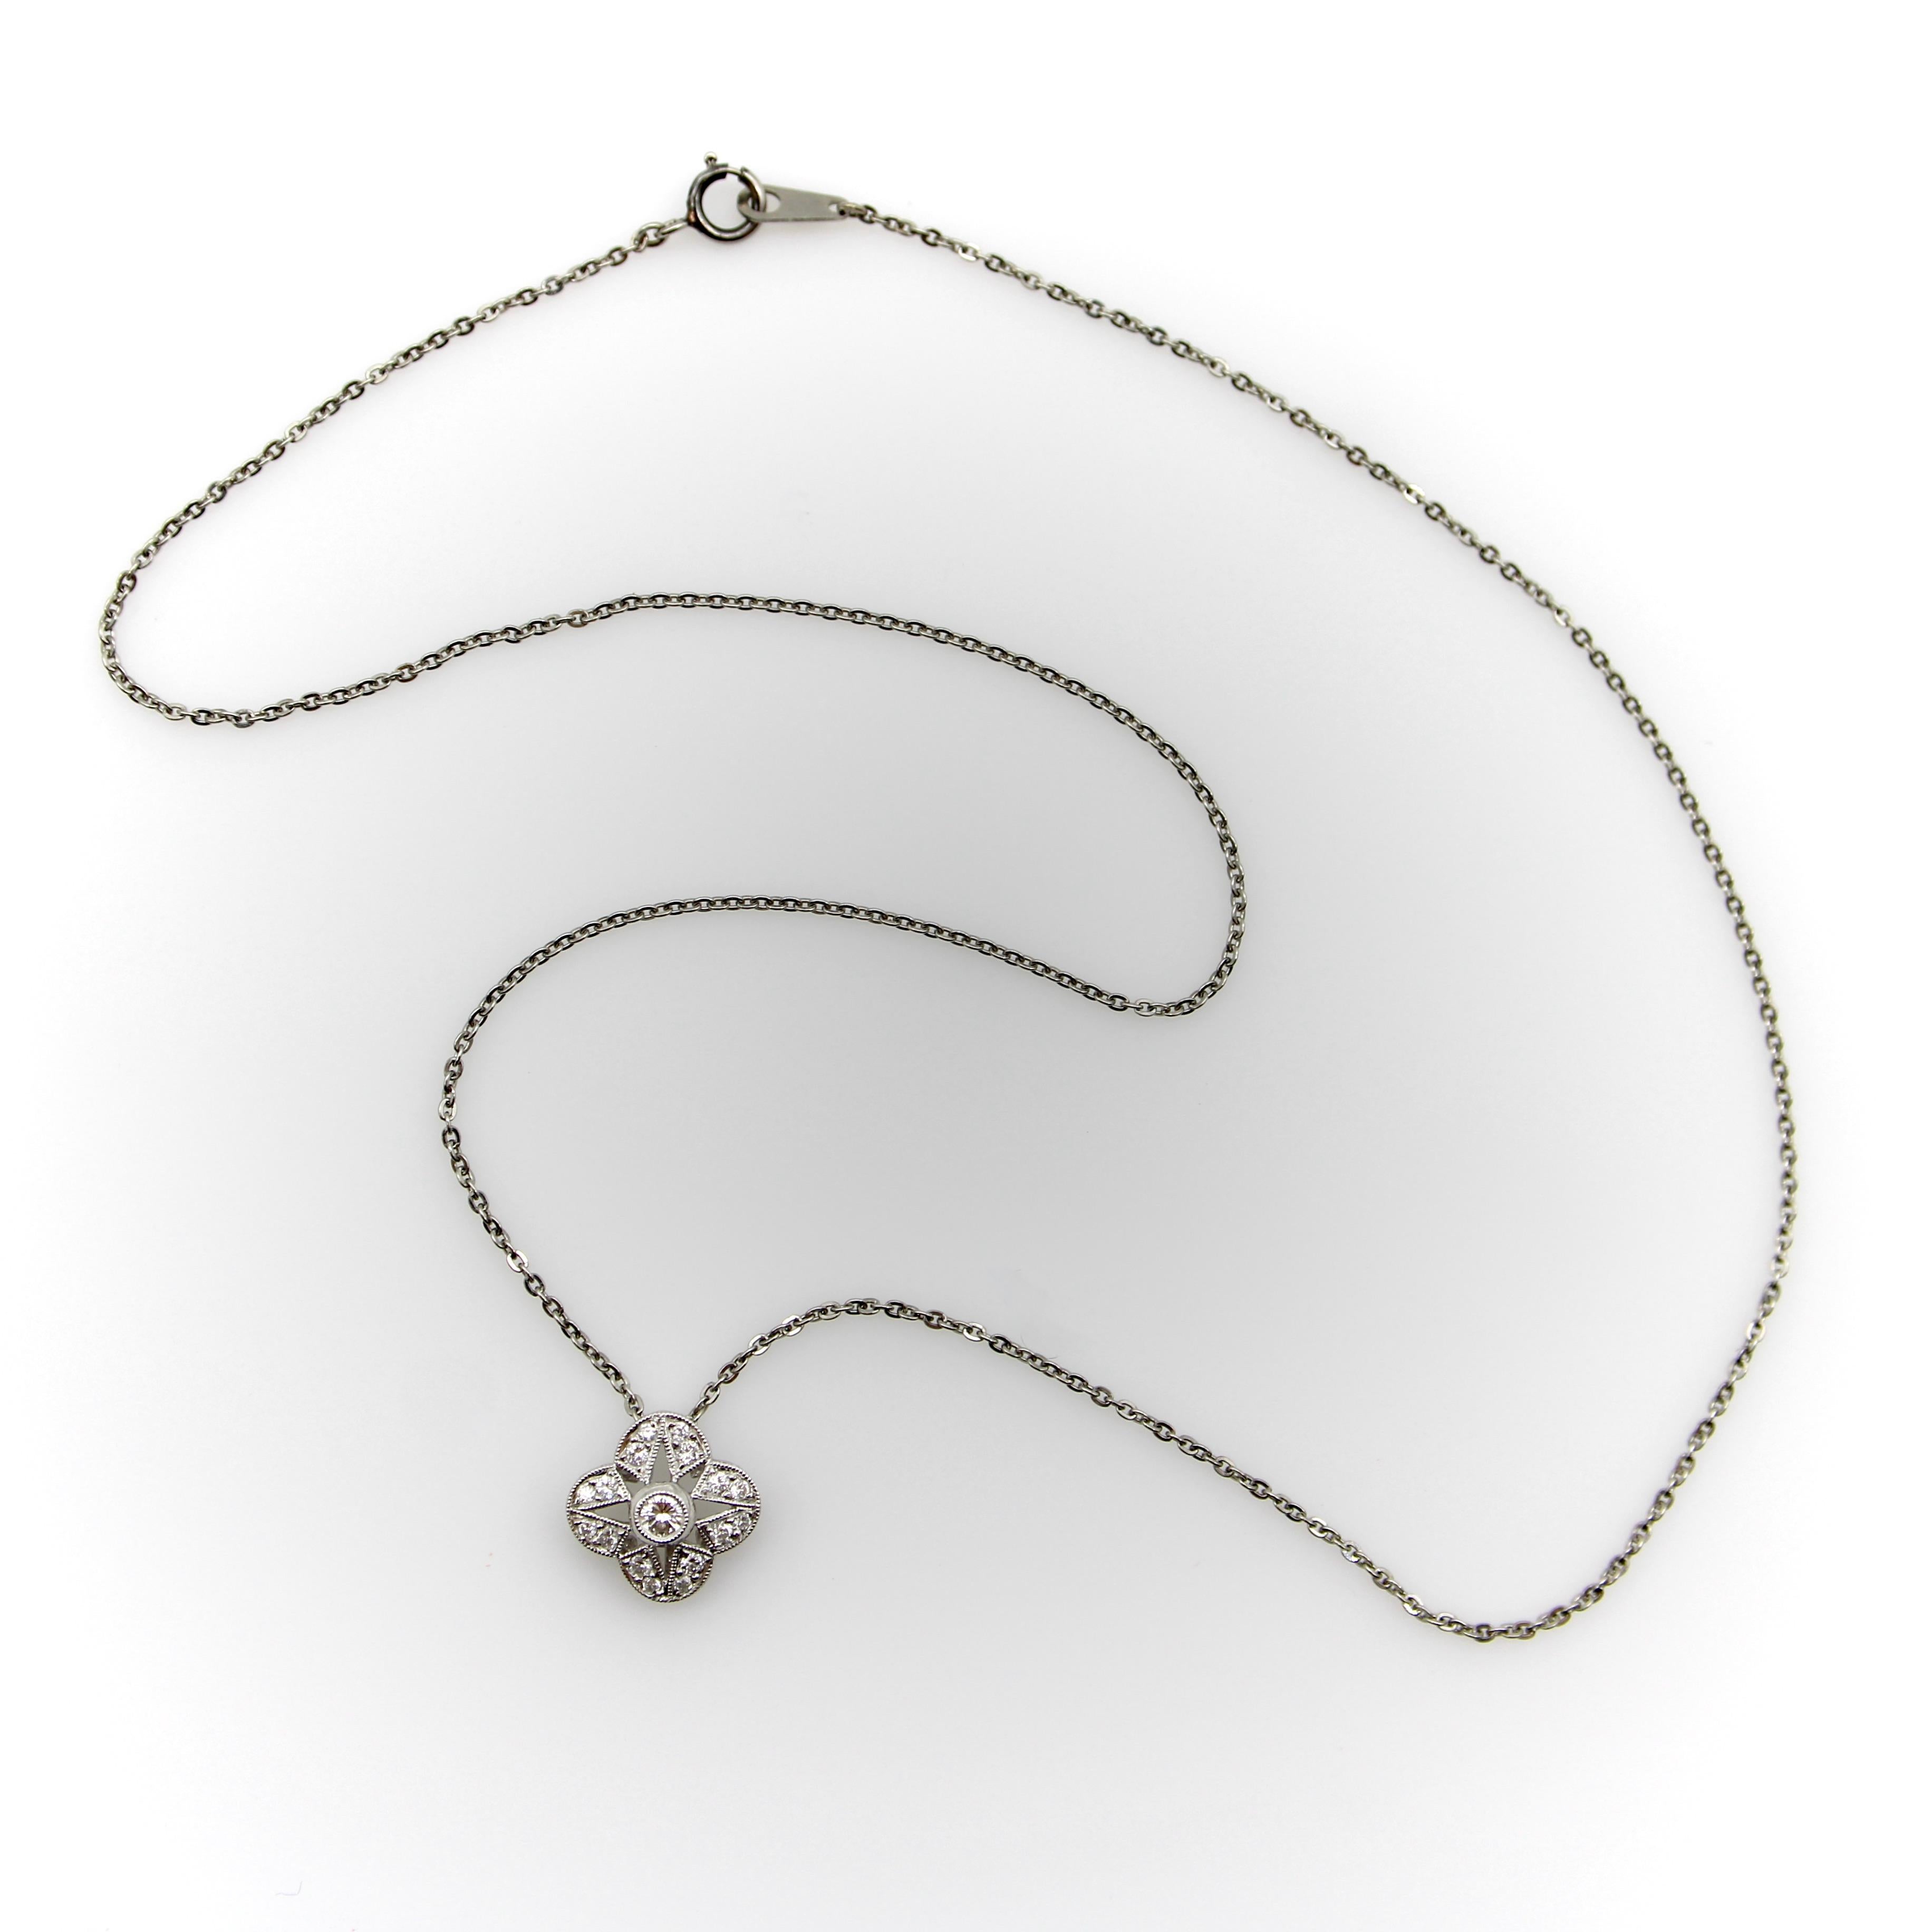 This beautiful platinum necklace features a quatrefoil shaped pendant full of sparkling diamonds. A round brilliant diamond adorns the center of the pedant, while sixteen smaller diamonds are bezel set into the surrounding surface of the pendant.